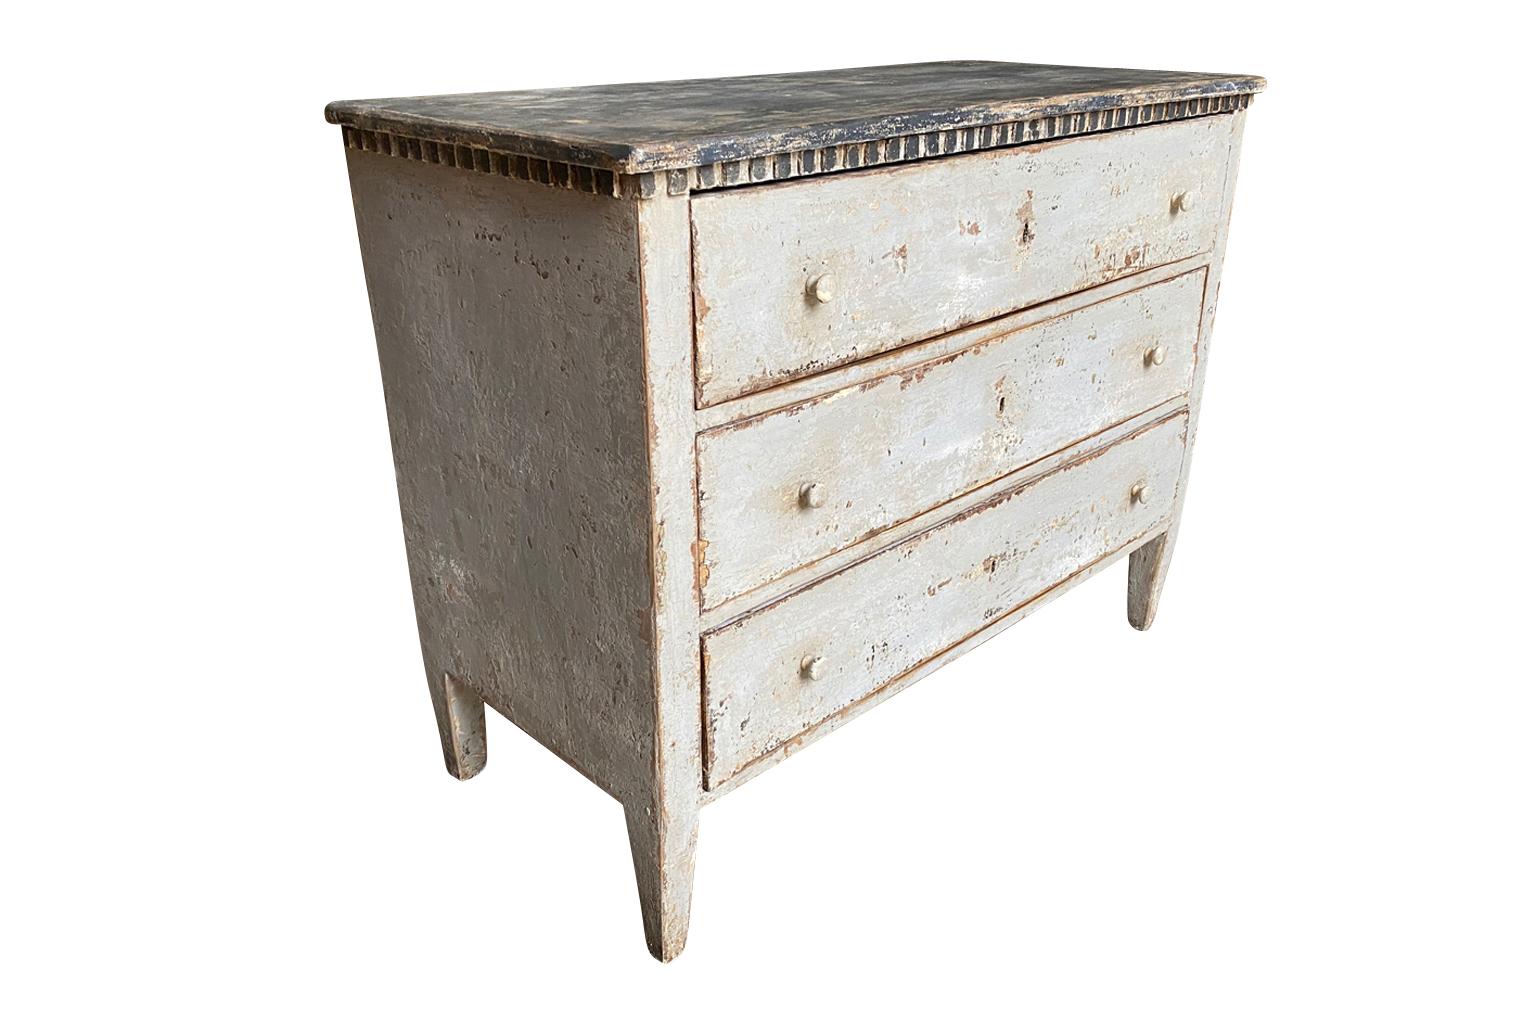 A wonderful later 19th century commode from the Catalan region of Spain. Soundly constructed from painted wood with dentilated detailing, three drawers over tapered legs. Terrific as a bedside table or converted into a vanity. Super patina.